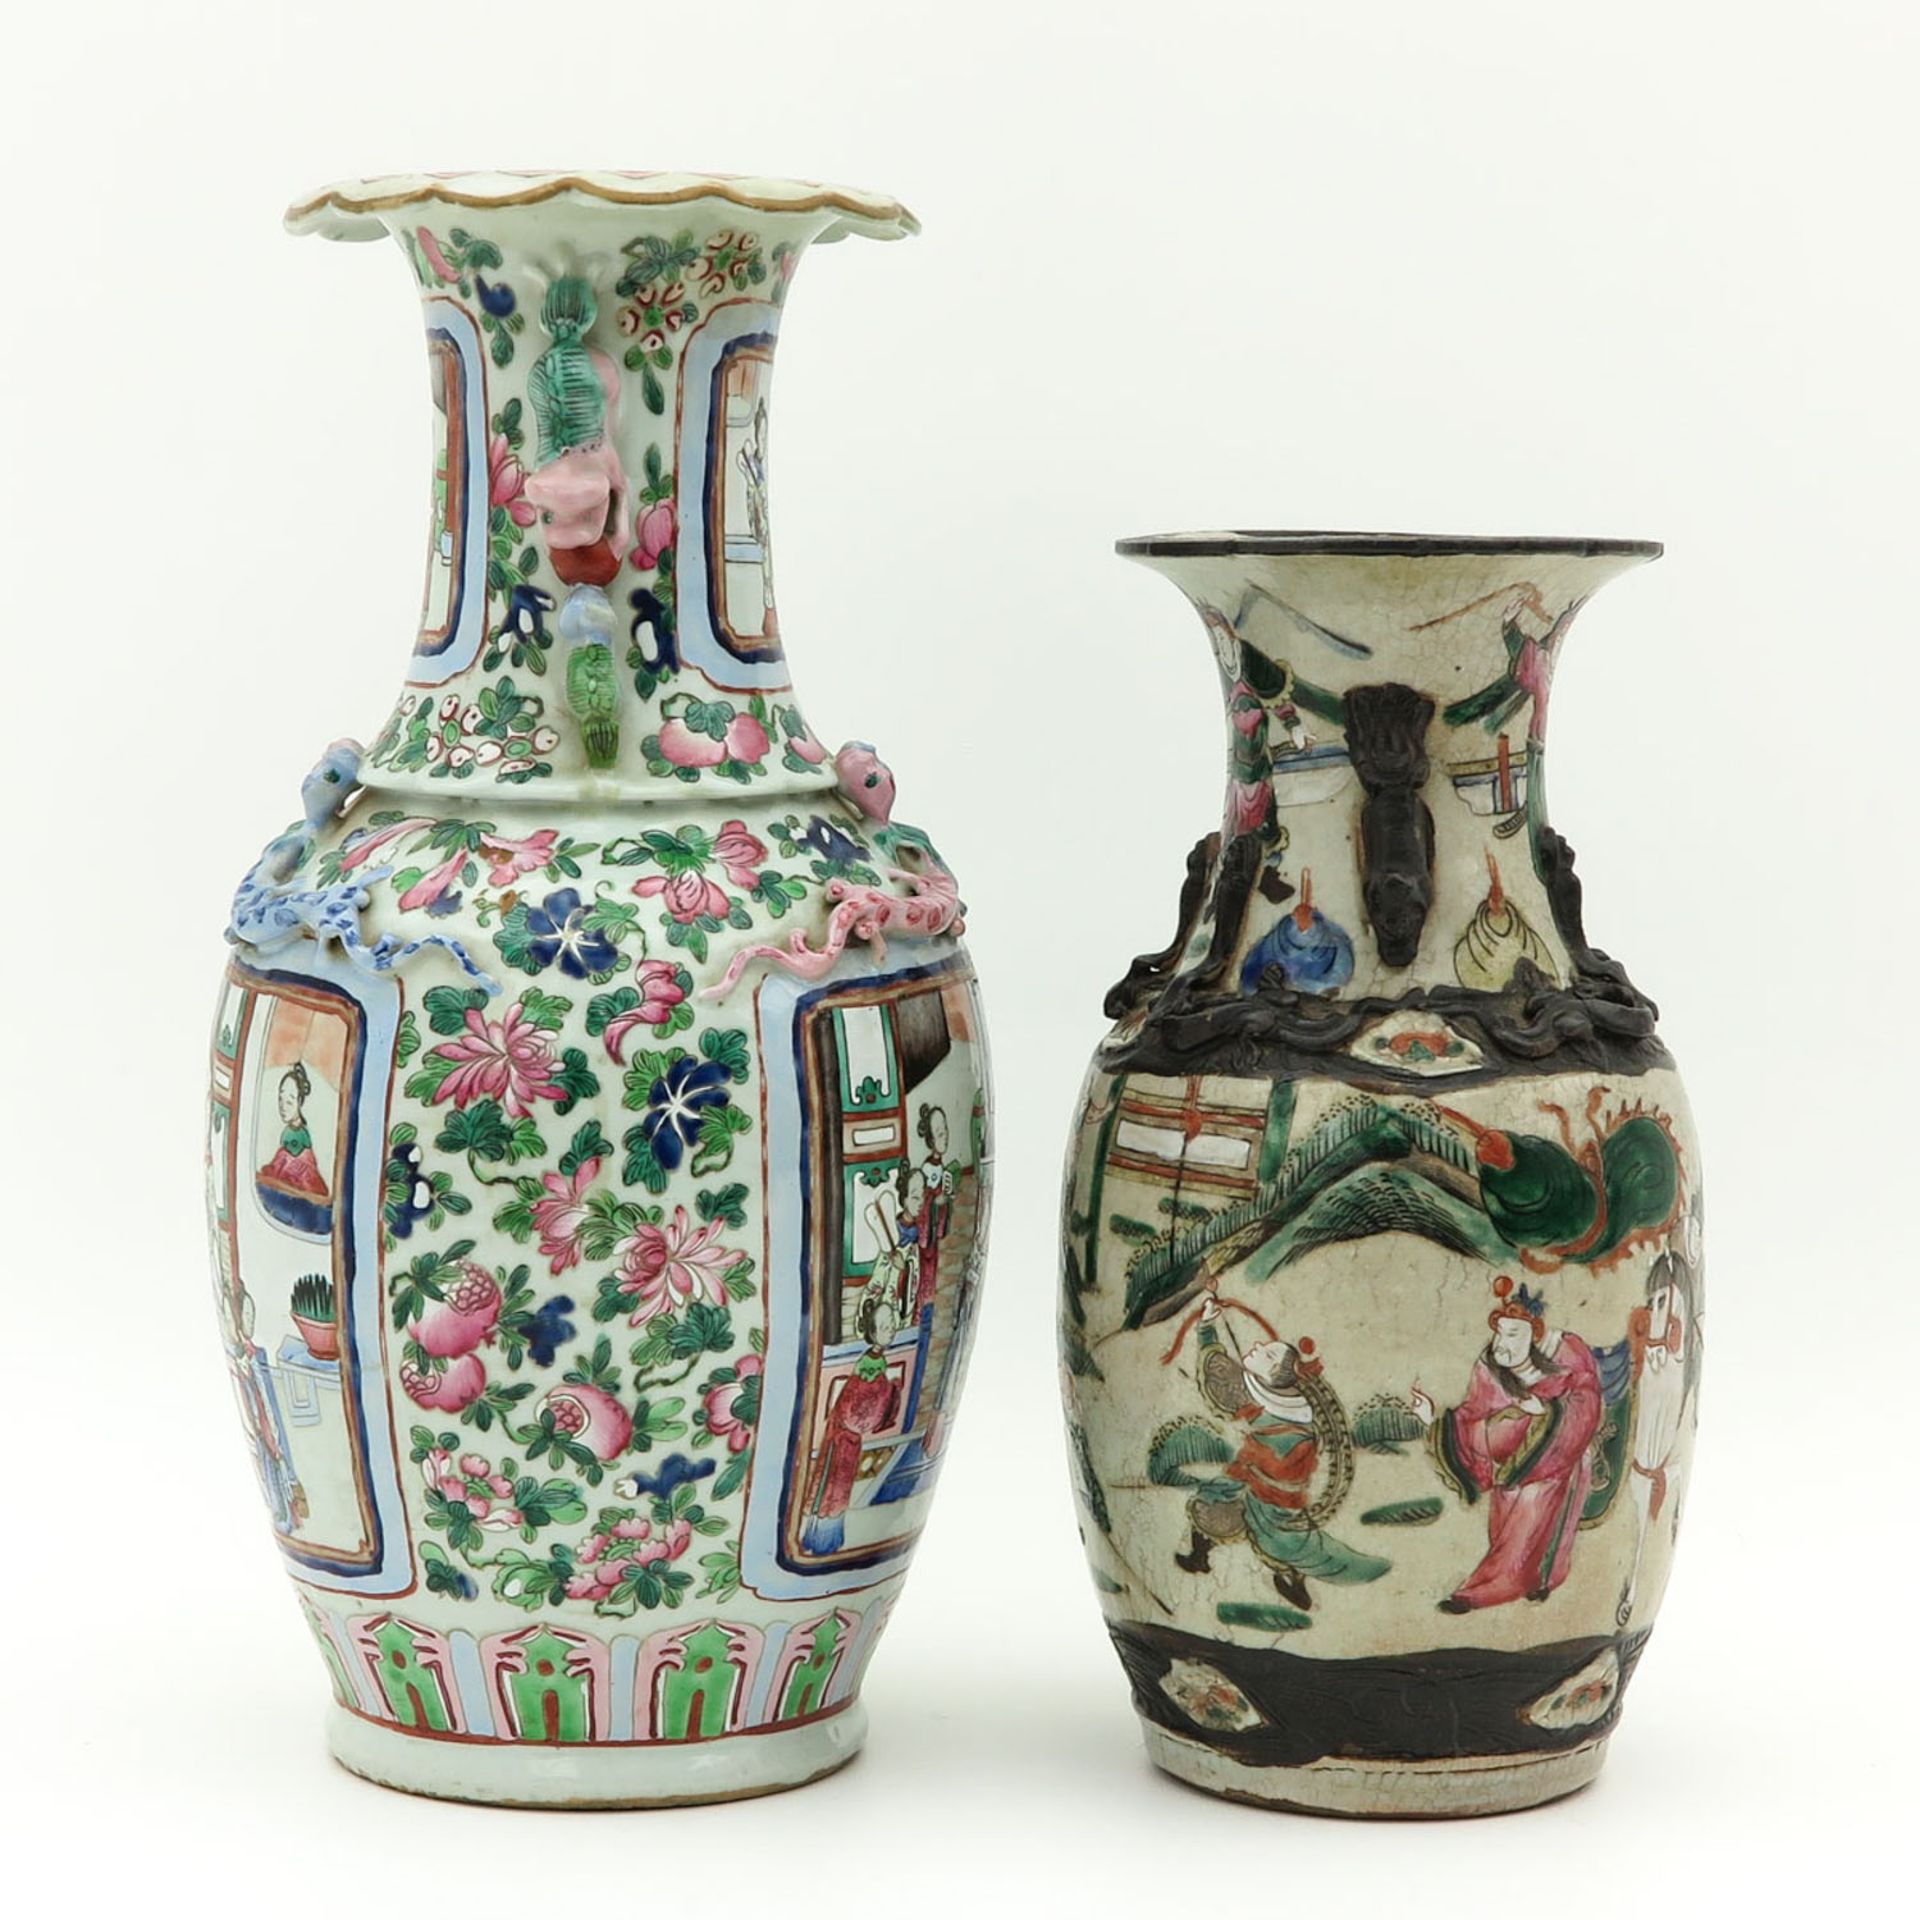 A Nanking and Cantonese Vase - Image 2 of 10